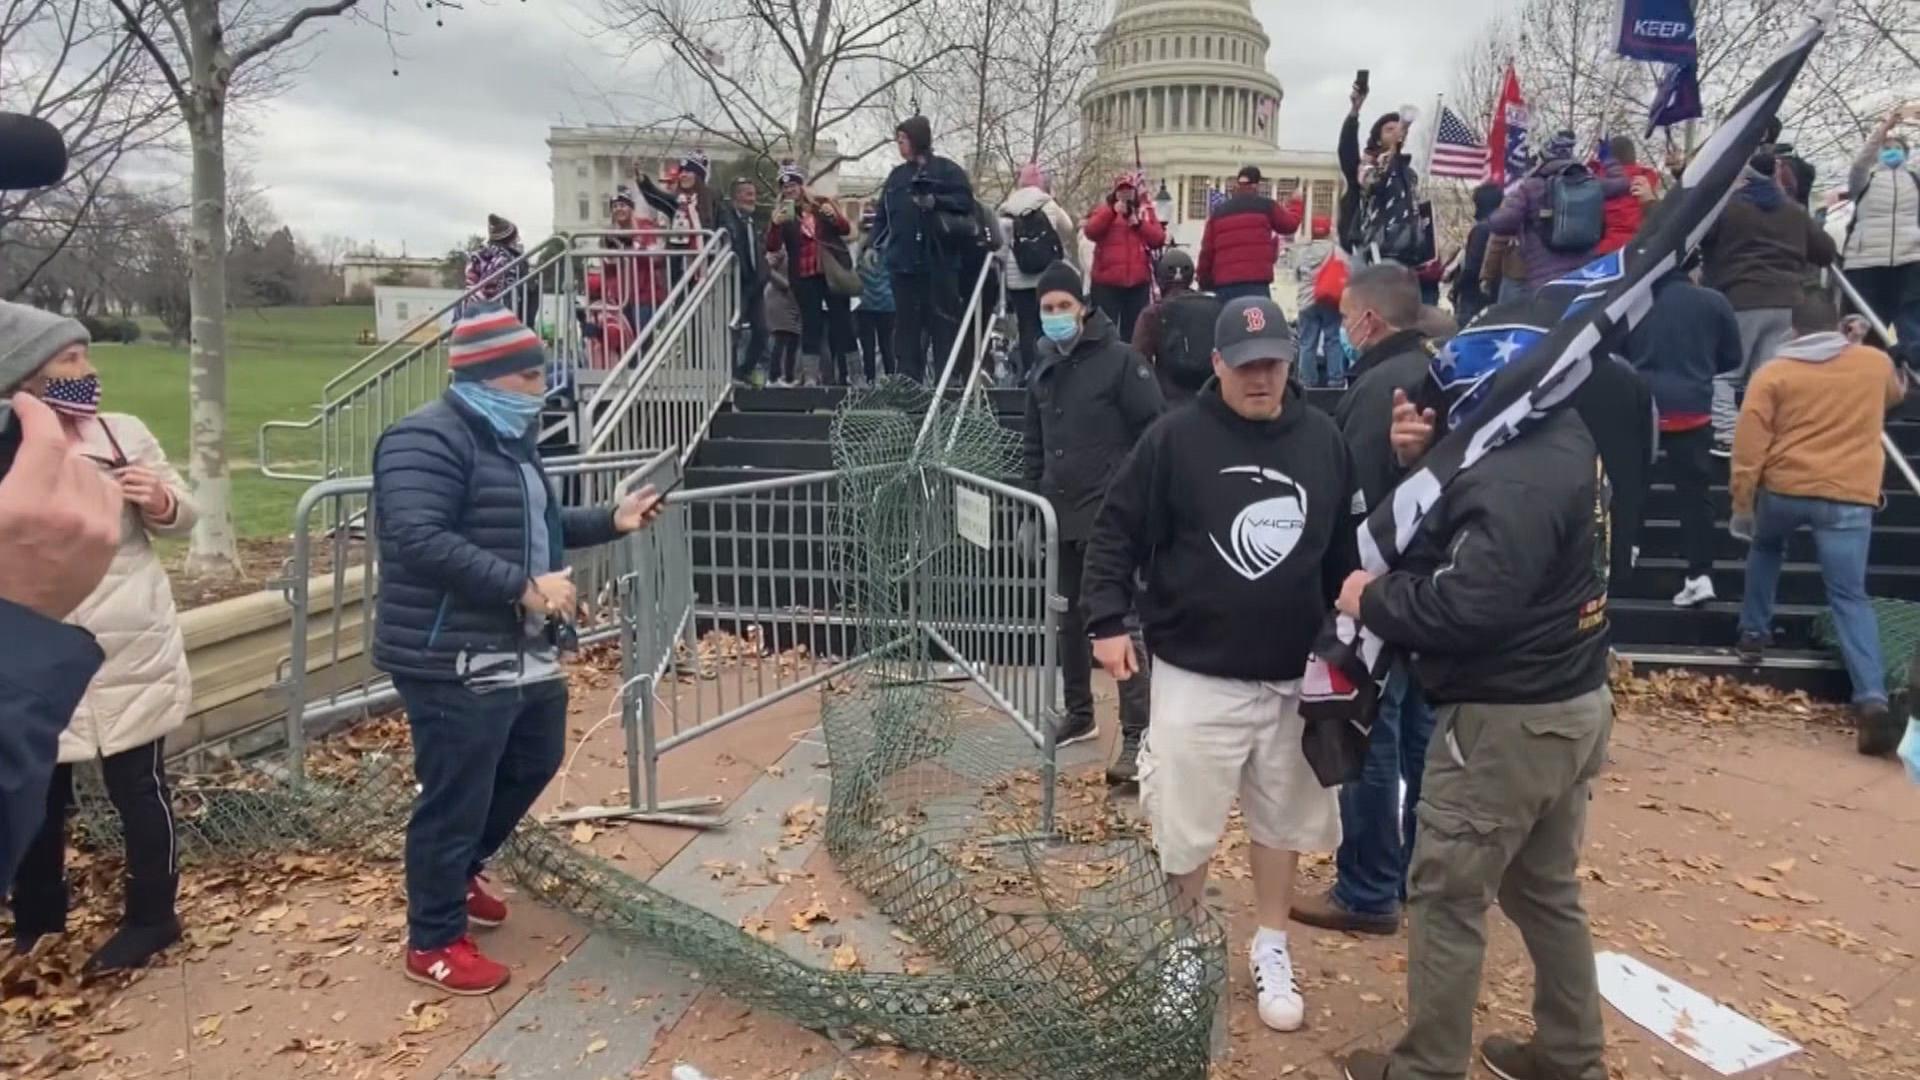 Pro-Trump supporters breach security gates at the U.S. Capitol on Jan. 6, 2021. (WTTW News via CNN)